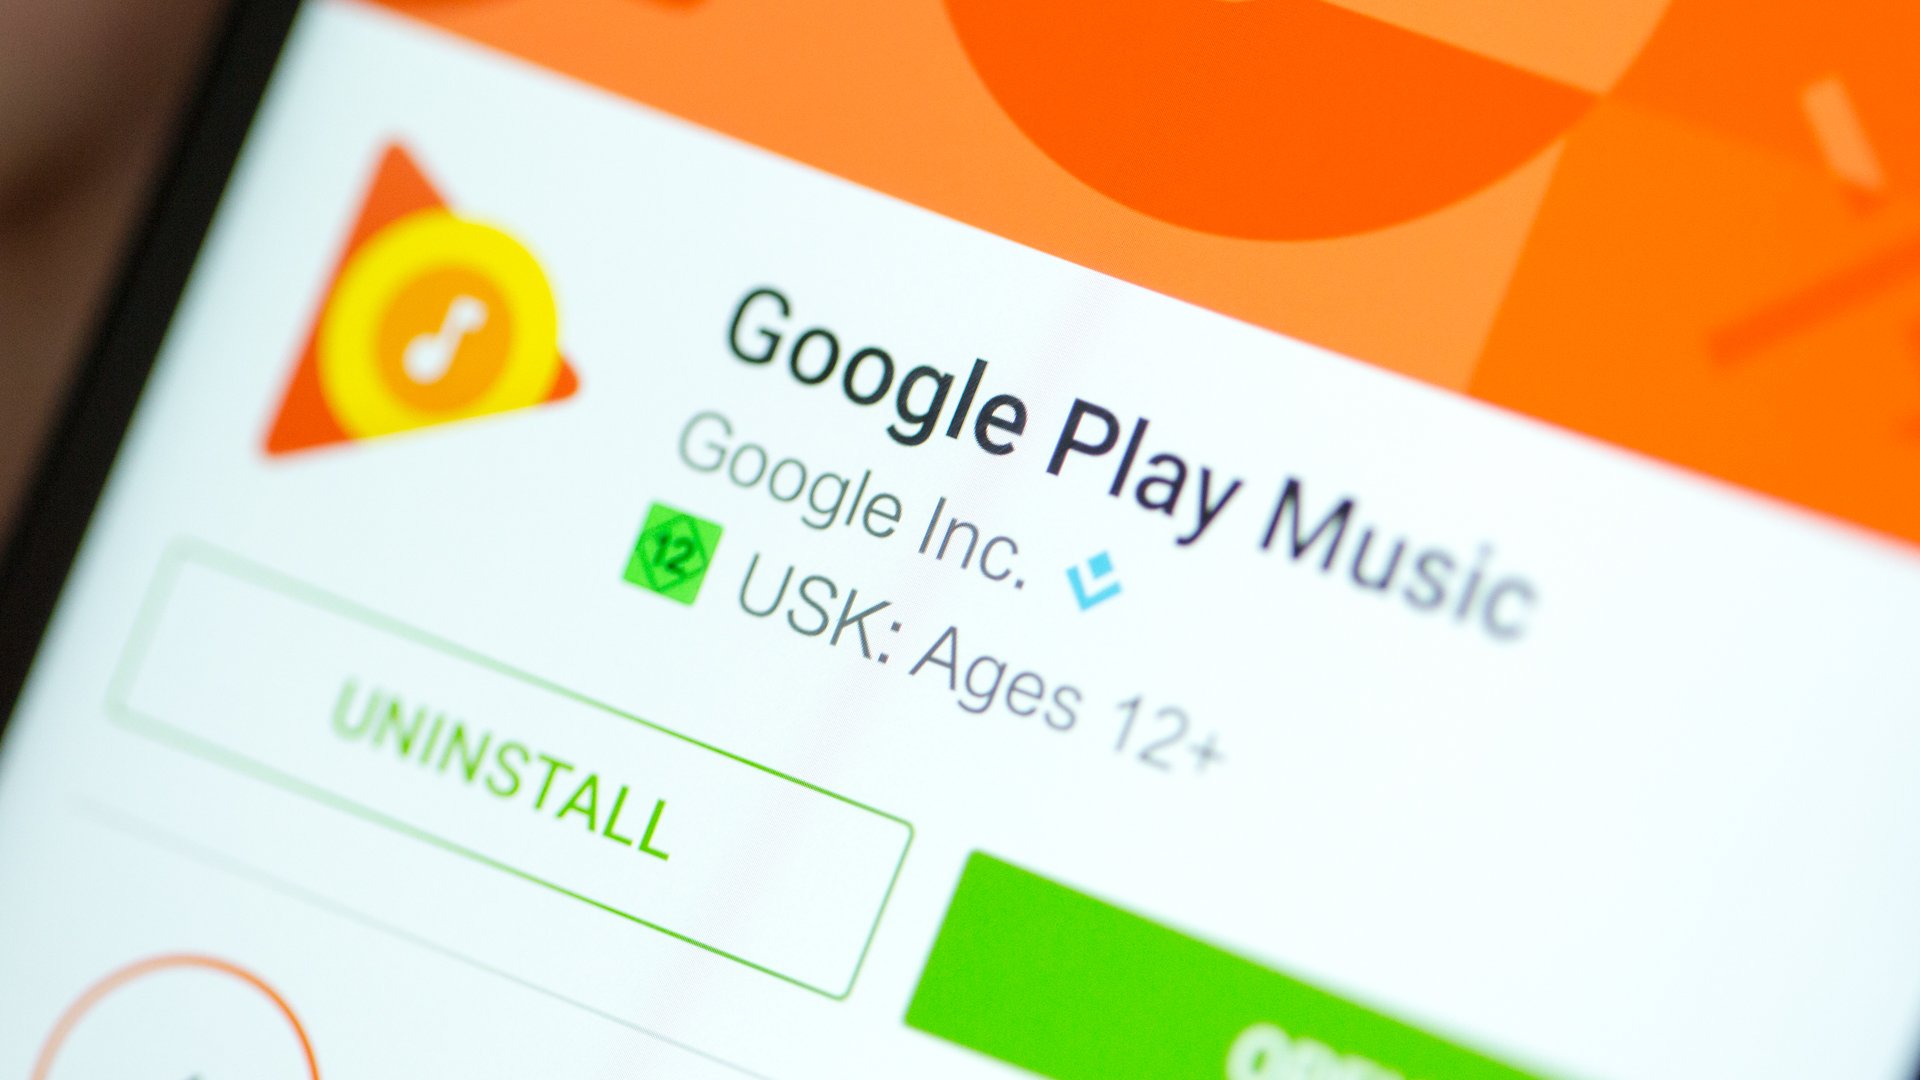 Paid app sharing: Google wants your whole family using Android